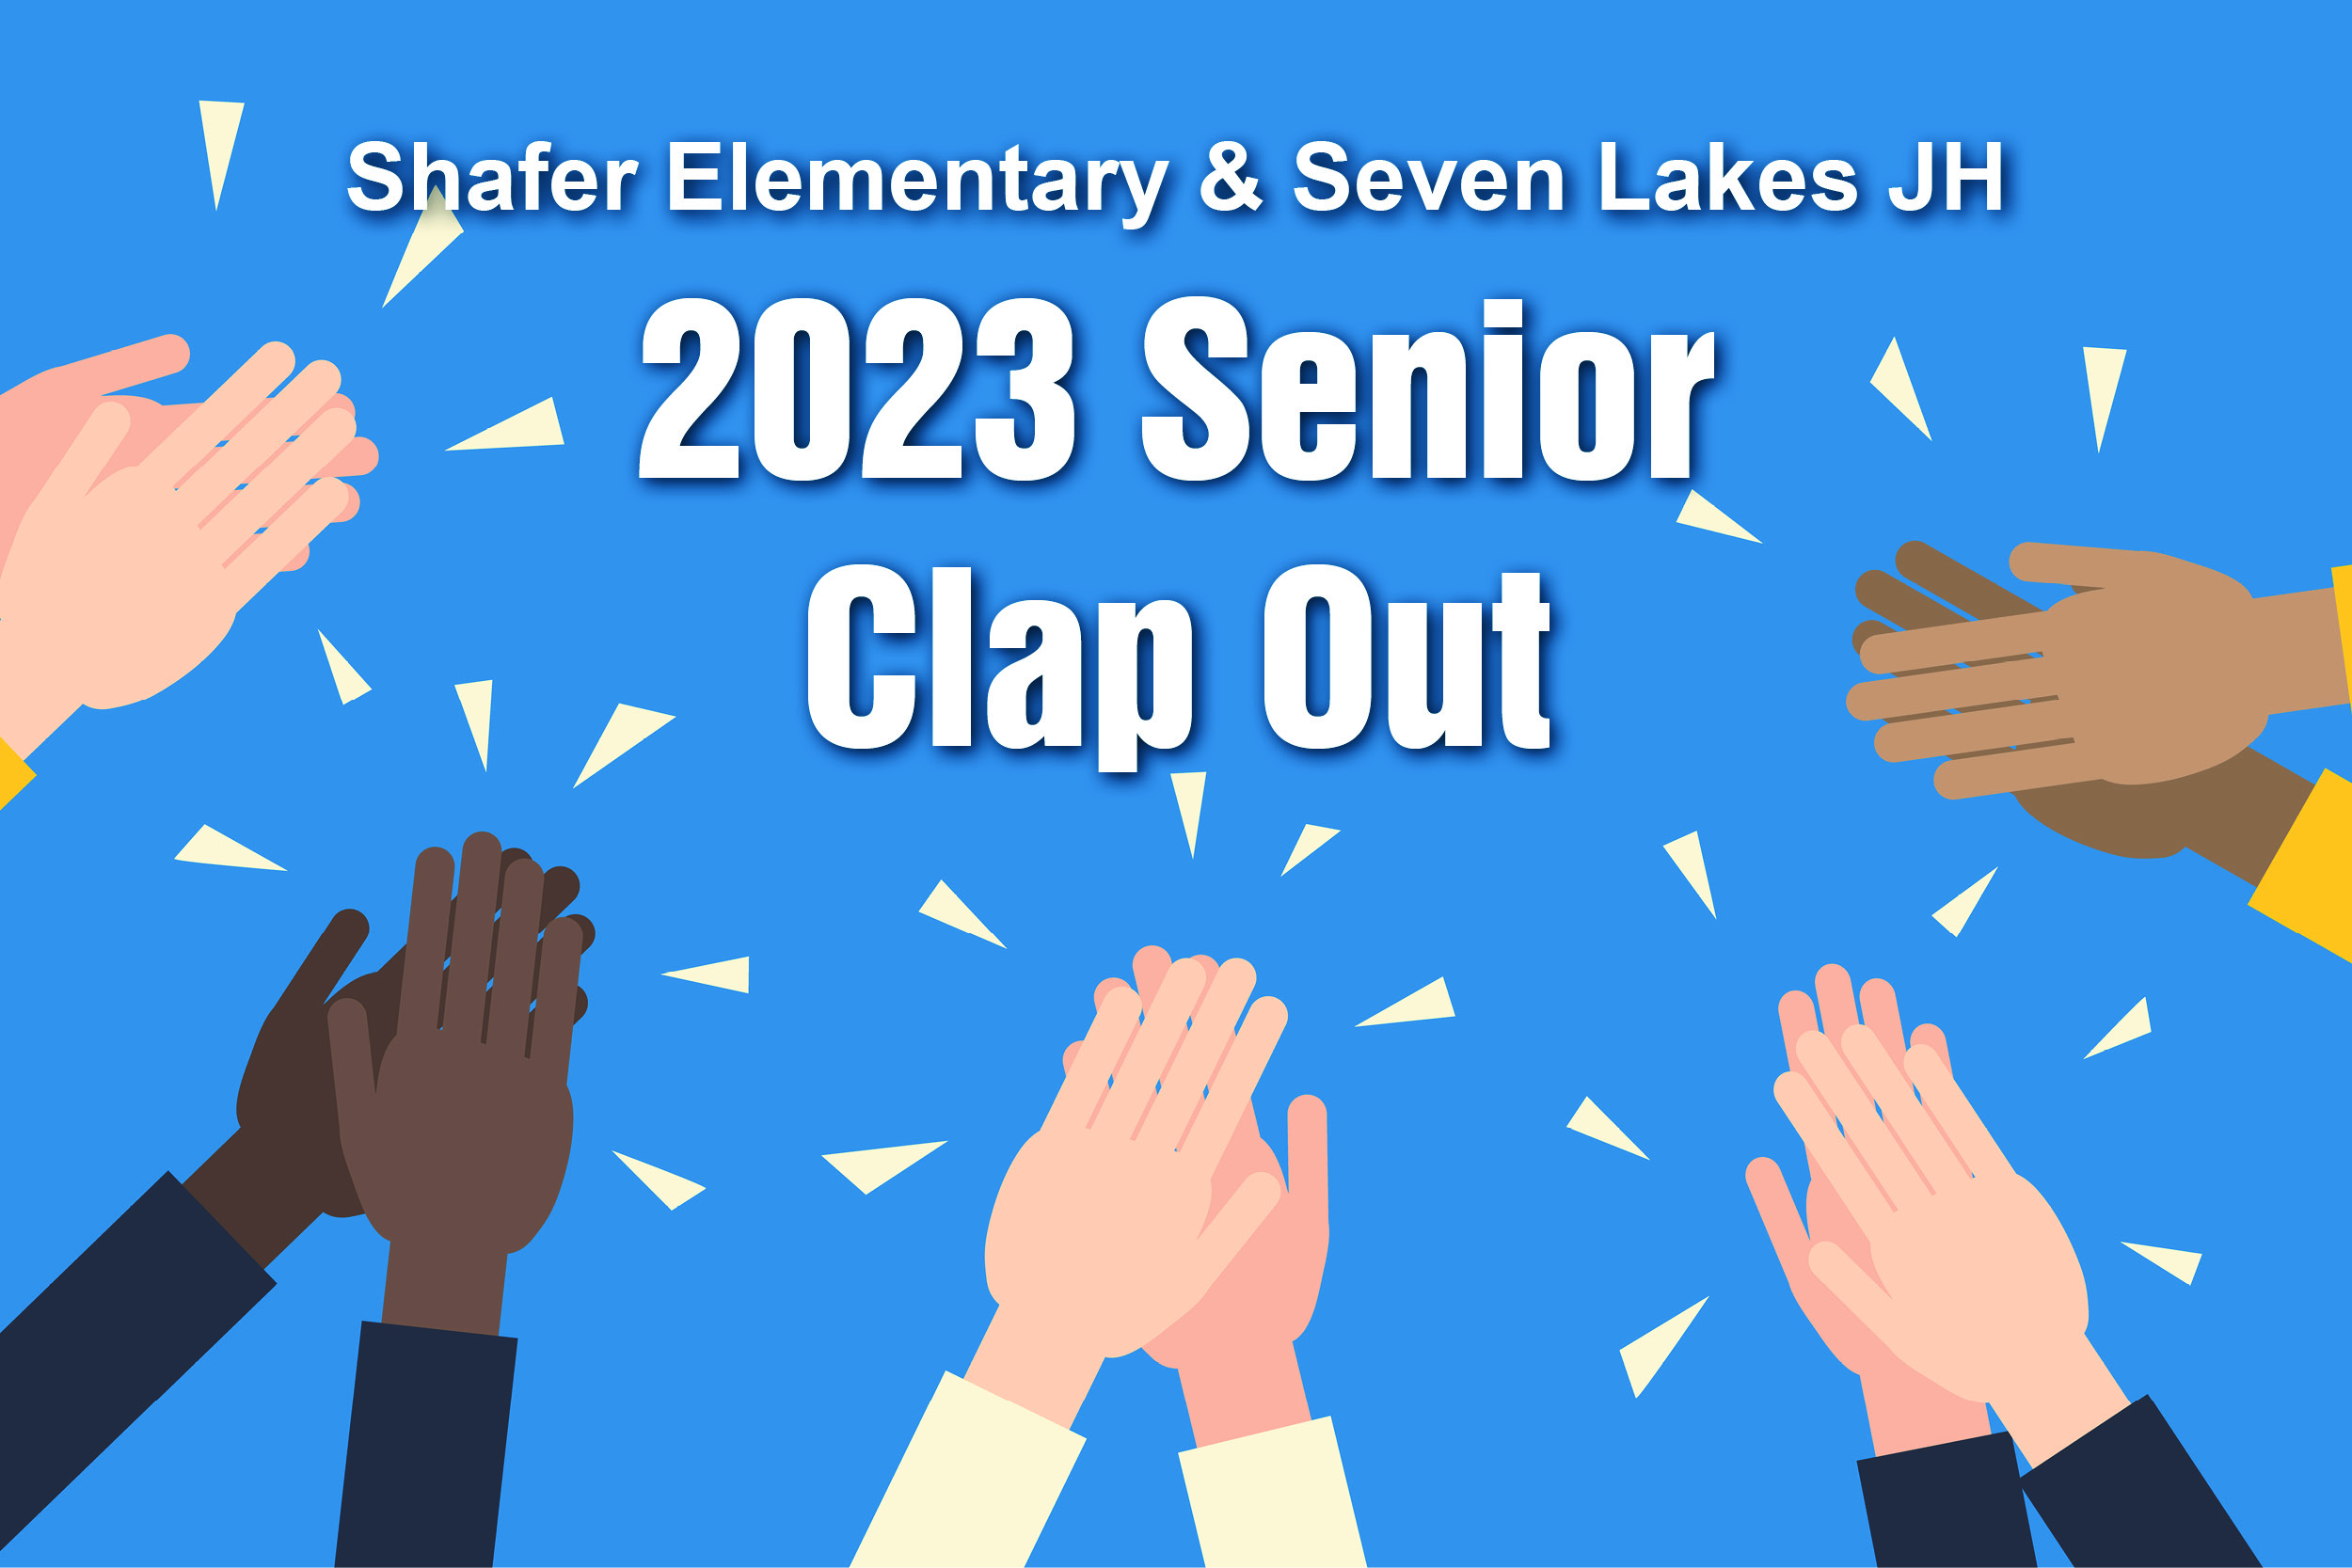 Shafer Elem & Seven Lakes JH Senior Clap Out - May 19th & 23rd